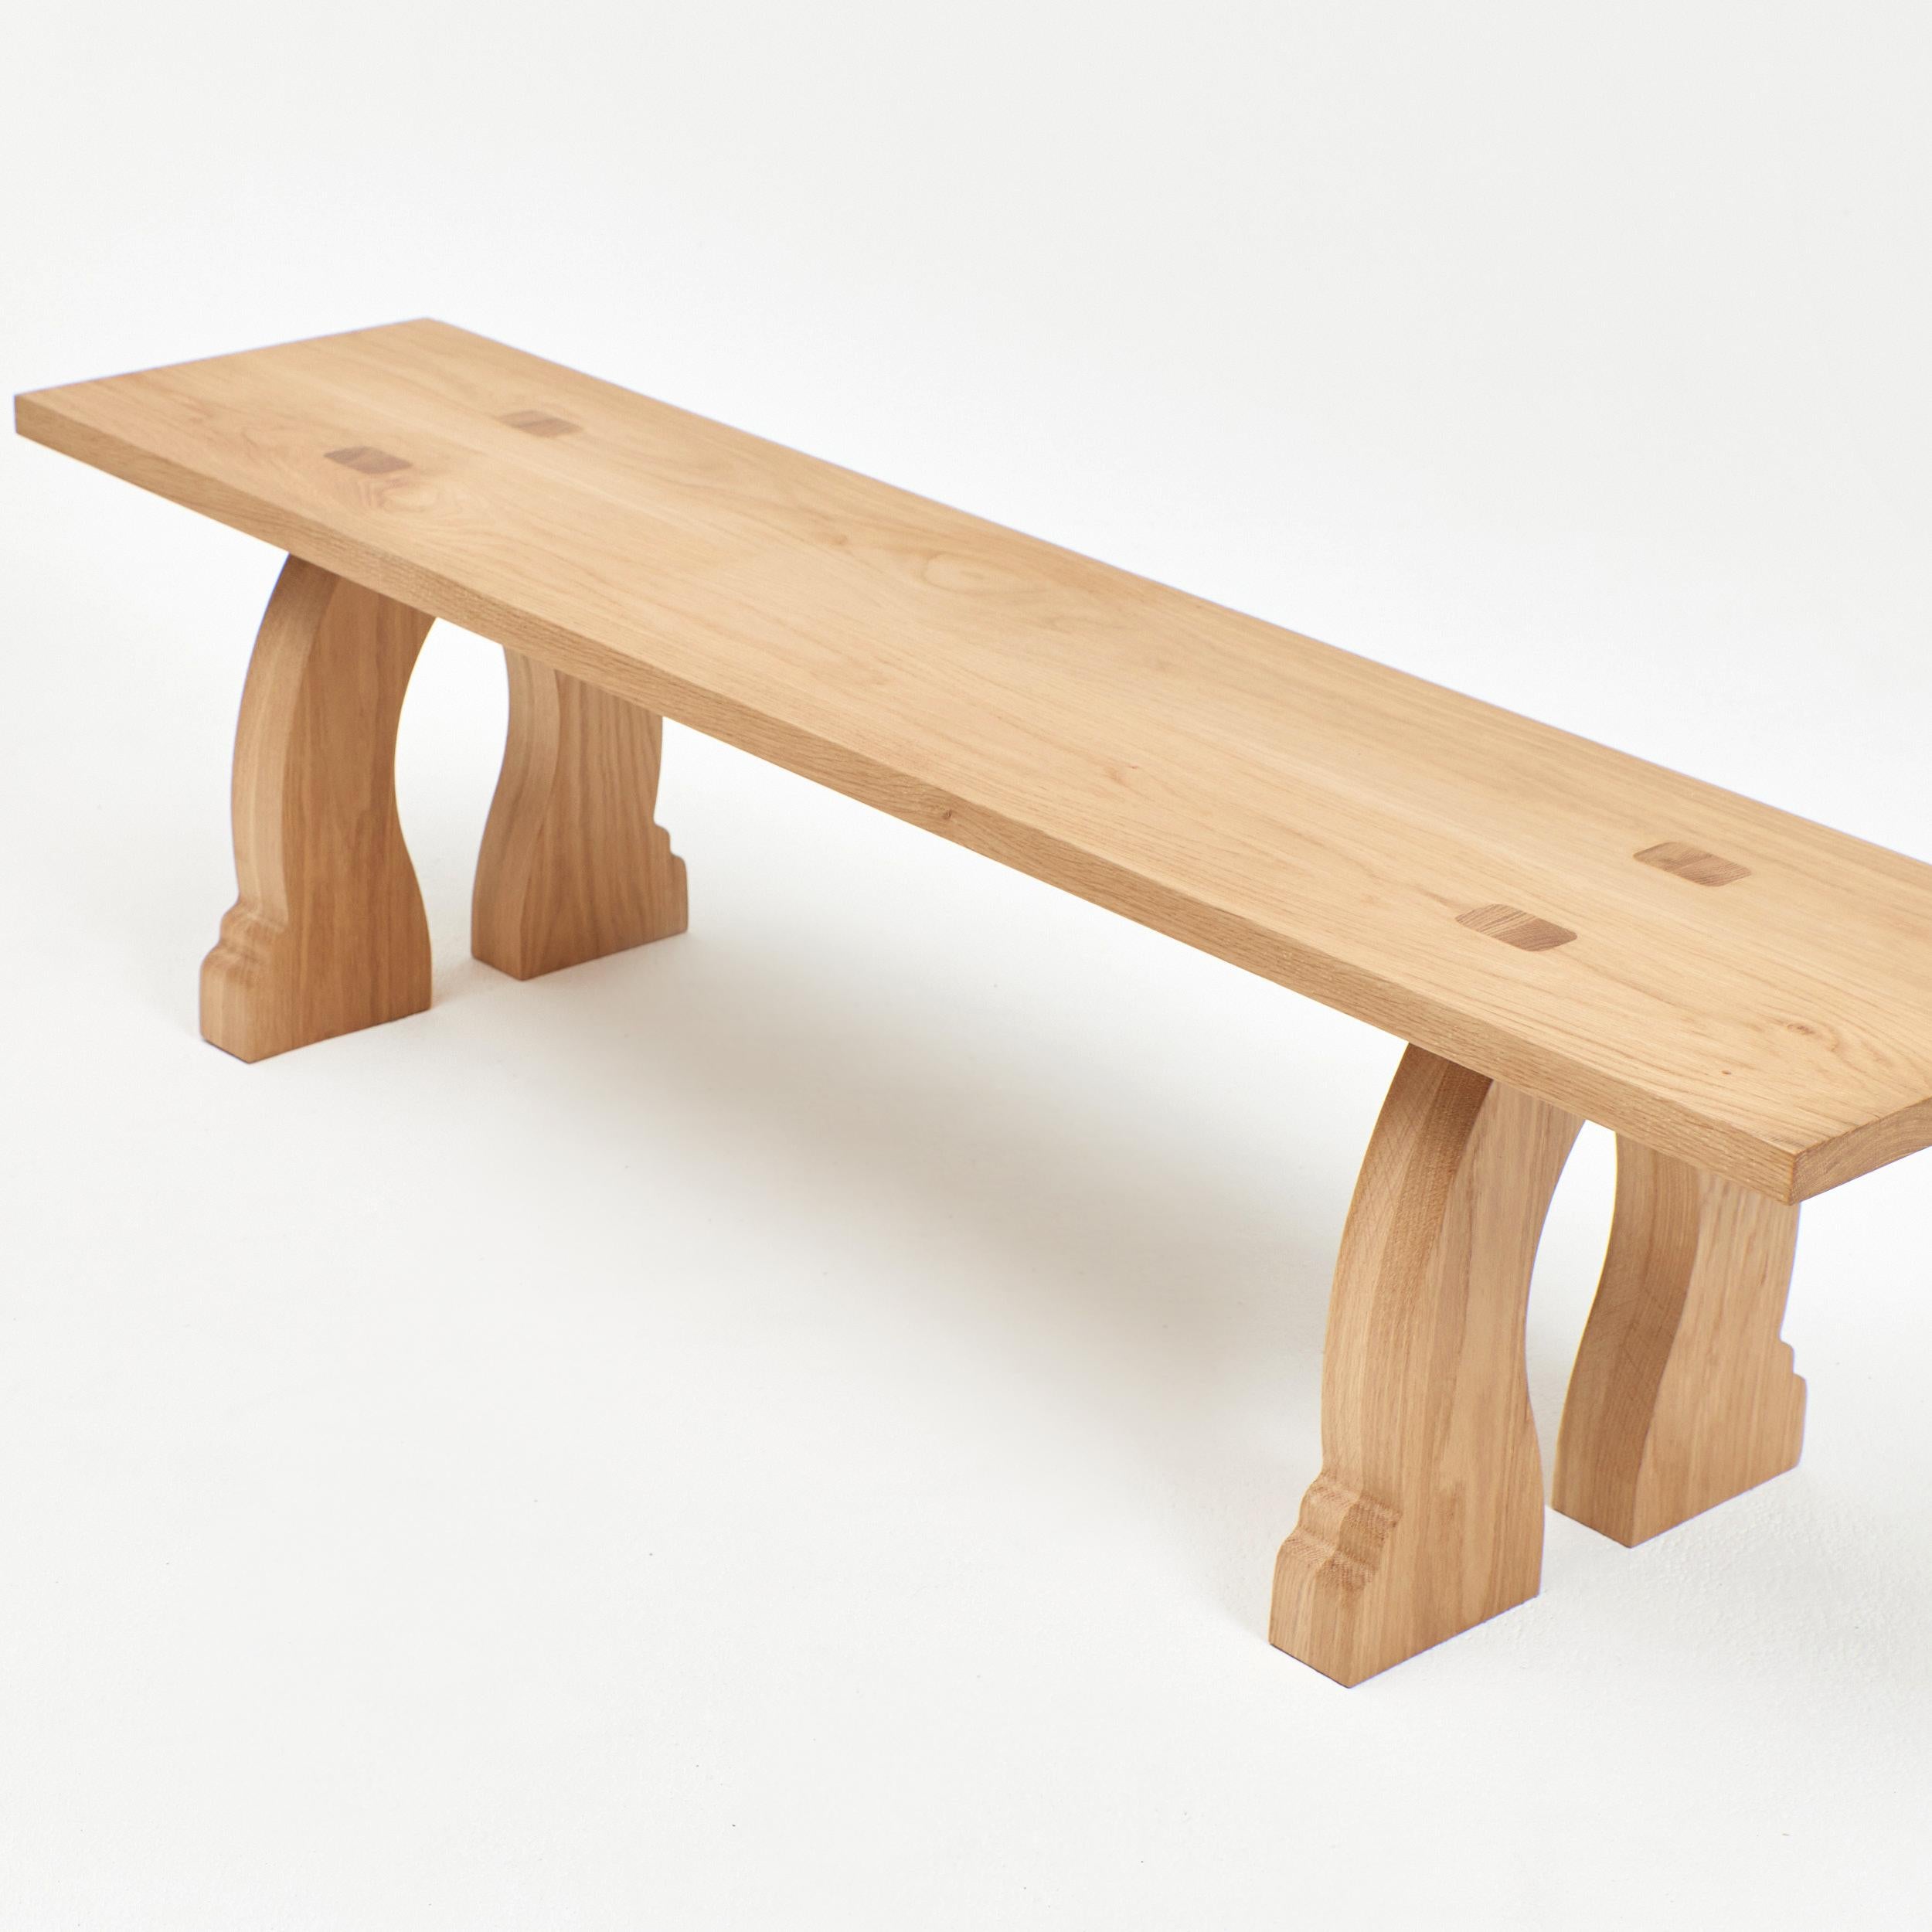 Sintra Bench in oak
Designed by Project 213A in 2023

The bench is made by highly skilled craftsmen in Northern Portugal from solid oak.

Bespoke dimensions and wood options available upon request.
Production lead time: 6-8 weeks